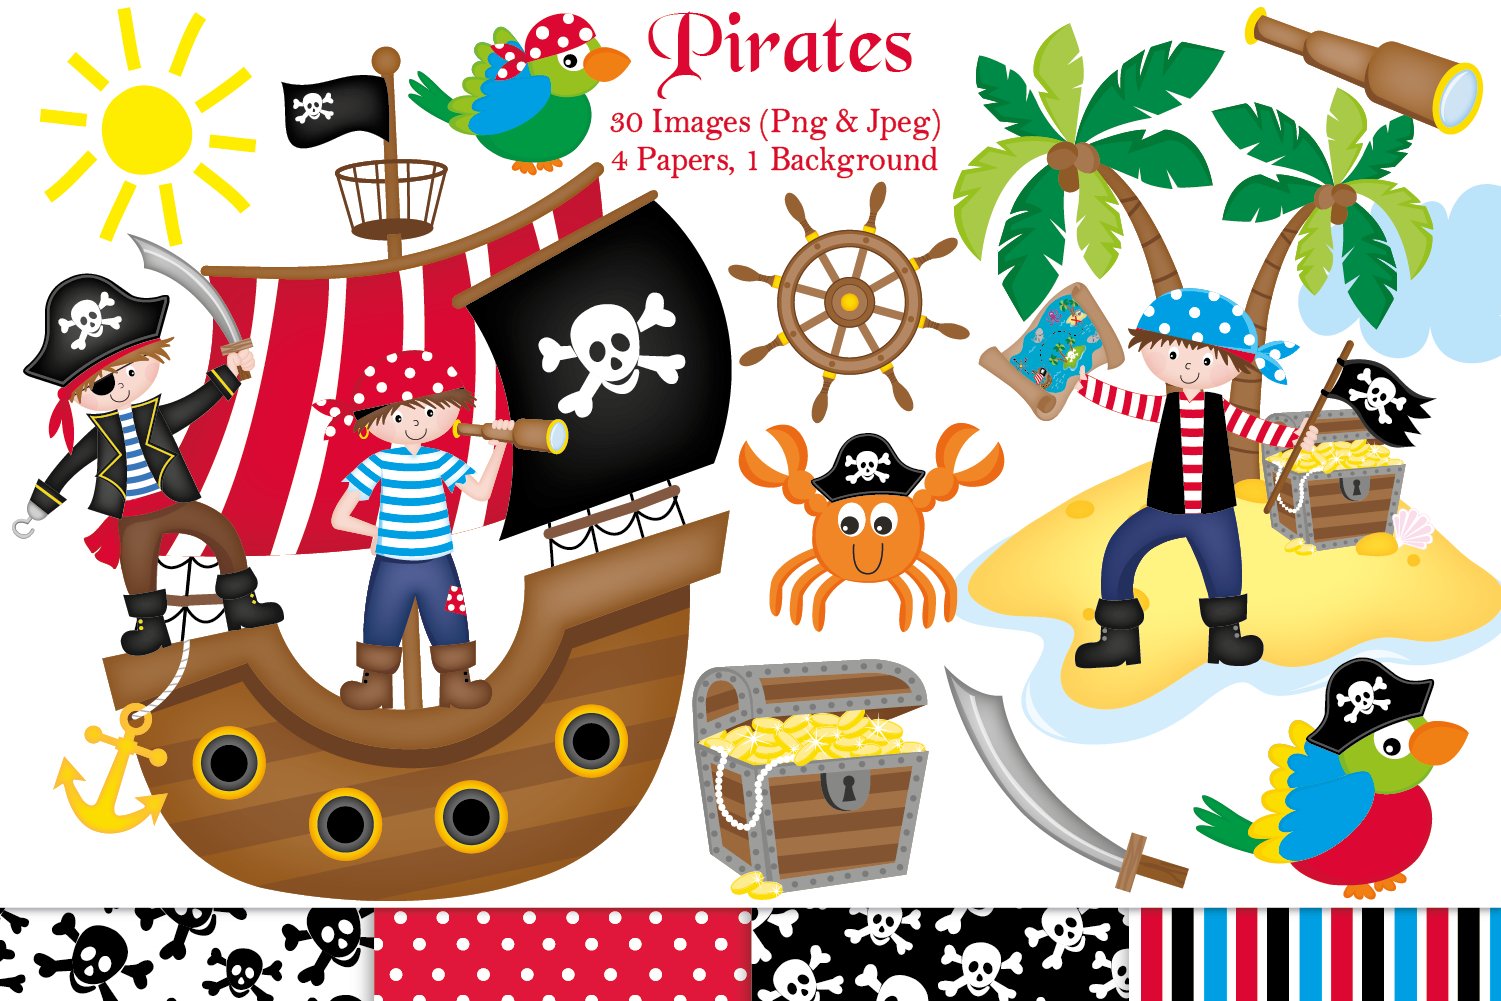 Big colorful elements for pirate image.